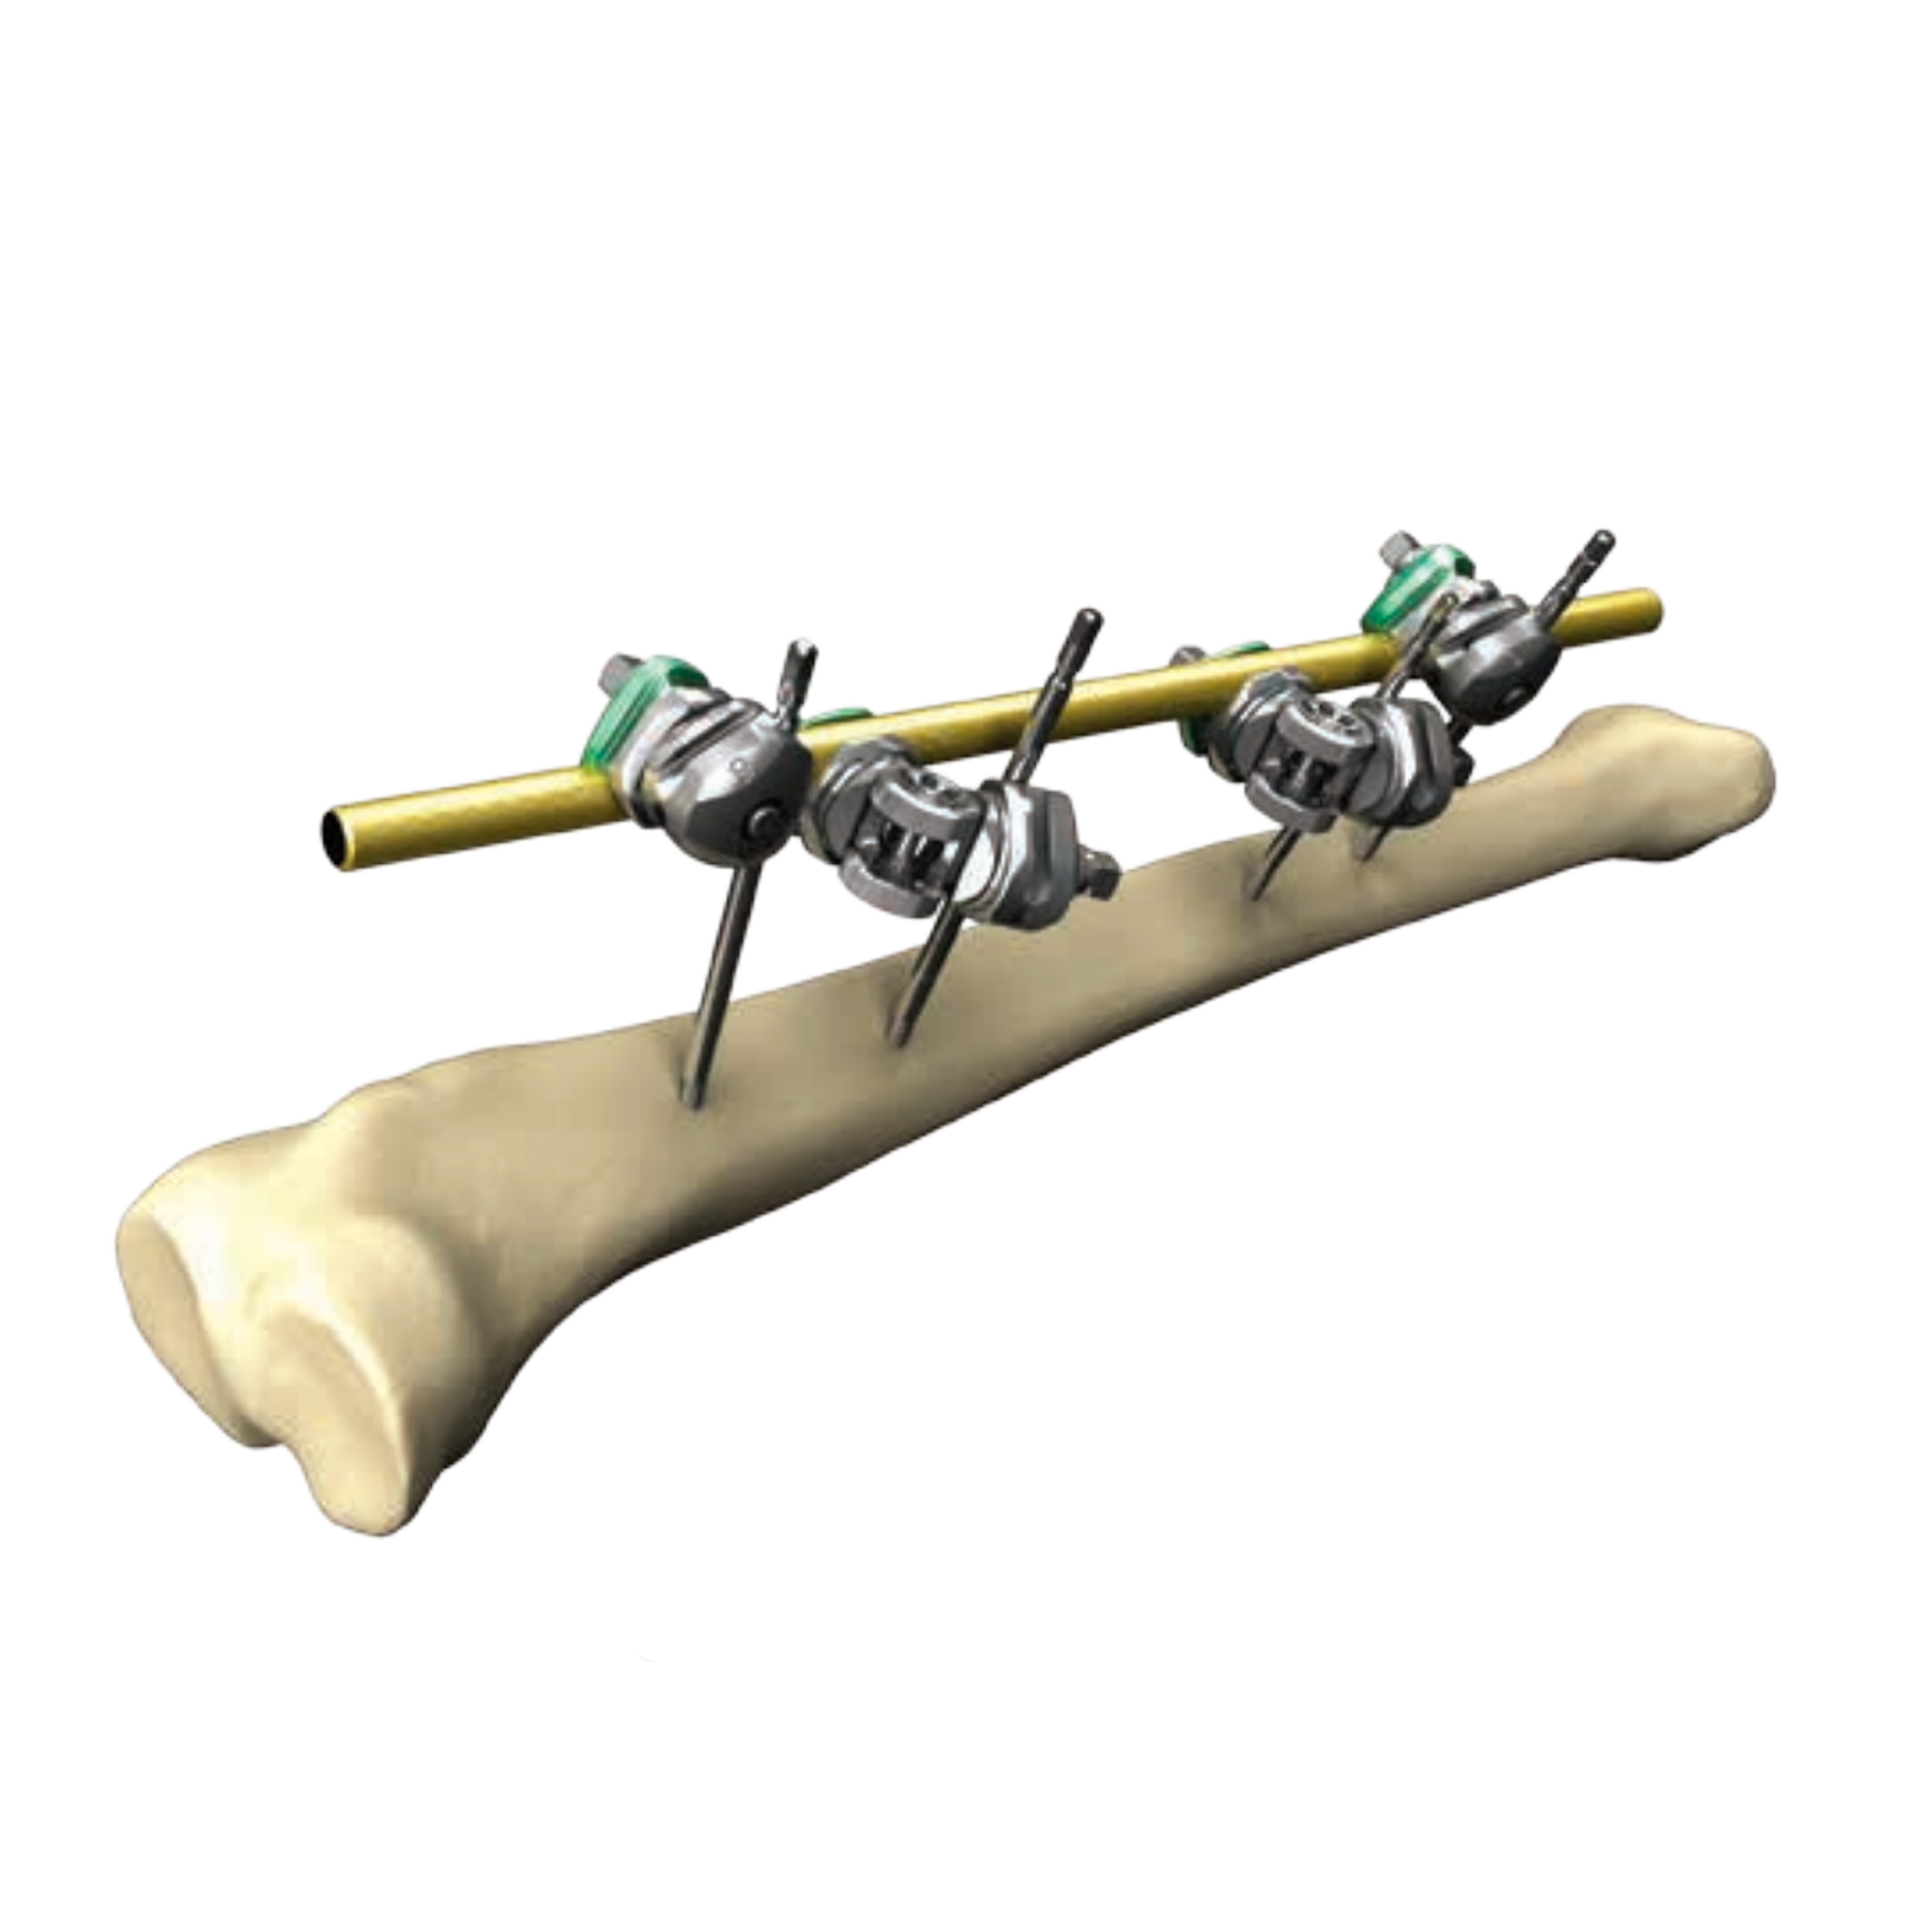 Hoffman 3 External Fixation | The Hoffmann 3 Modular External Fixation System is intended to provide stabilization of open and/or closed, stable or unstable fractures where soft tissue precludes the use of other fracture treatment methods.